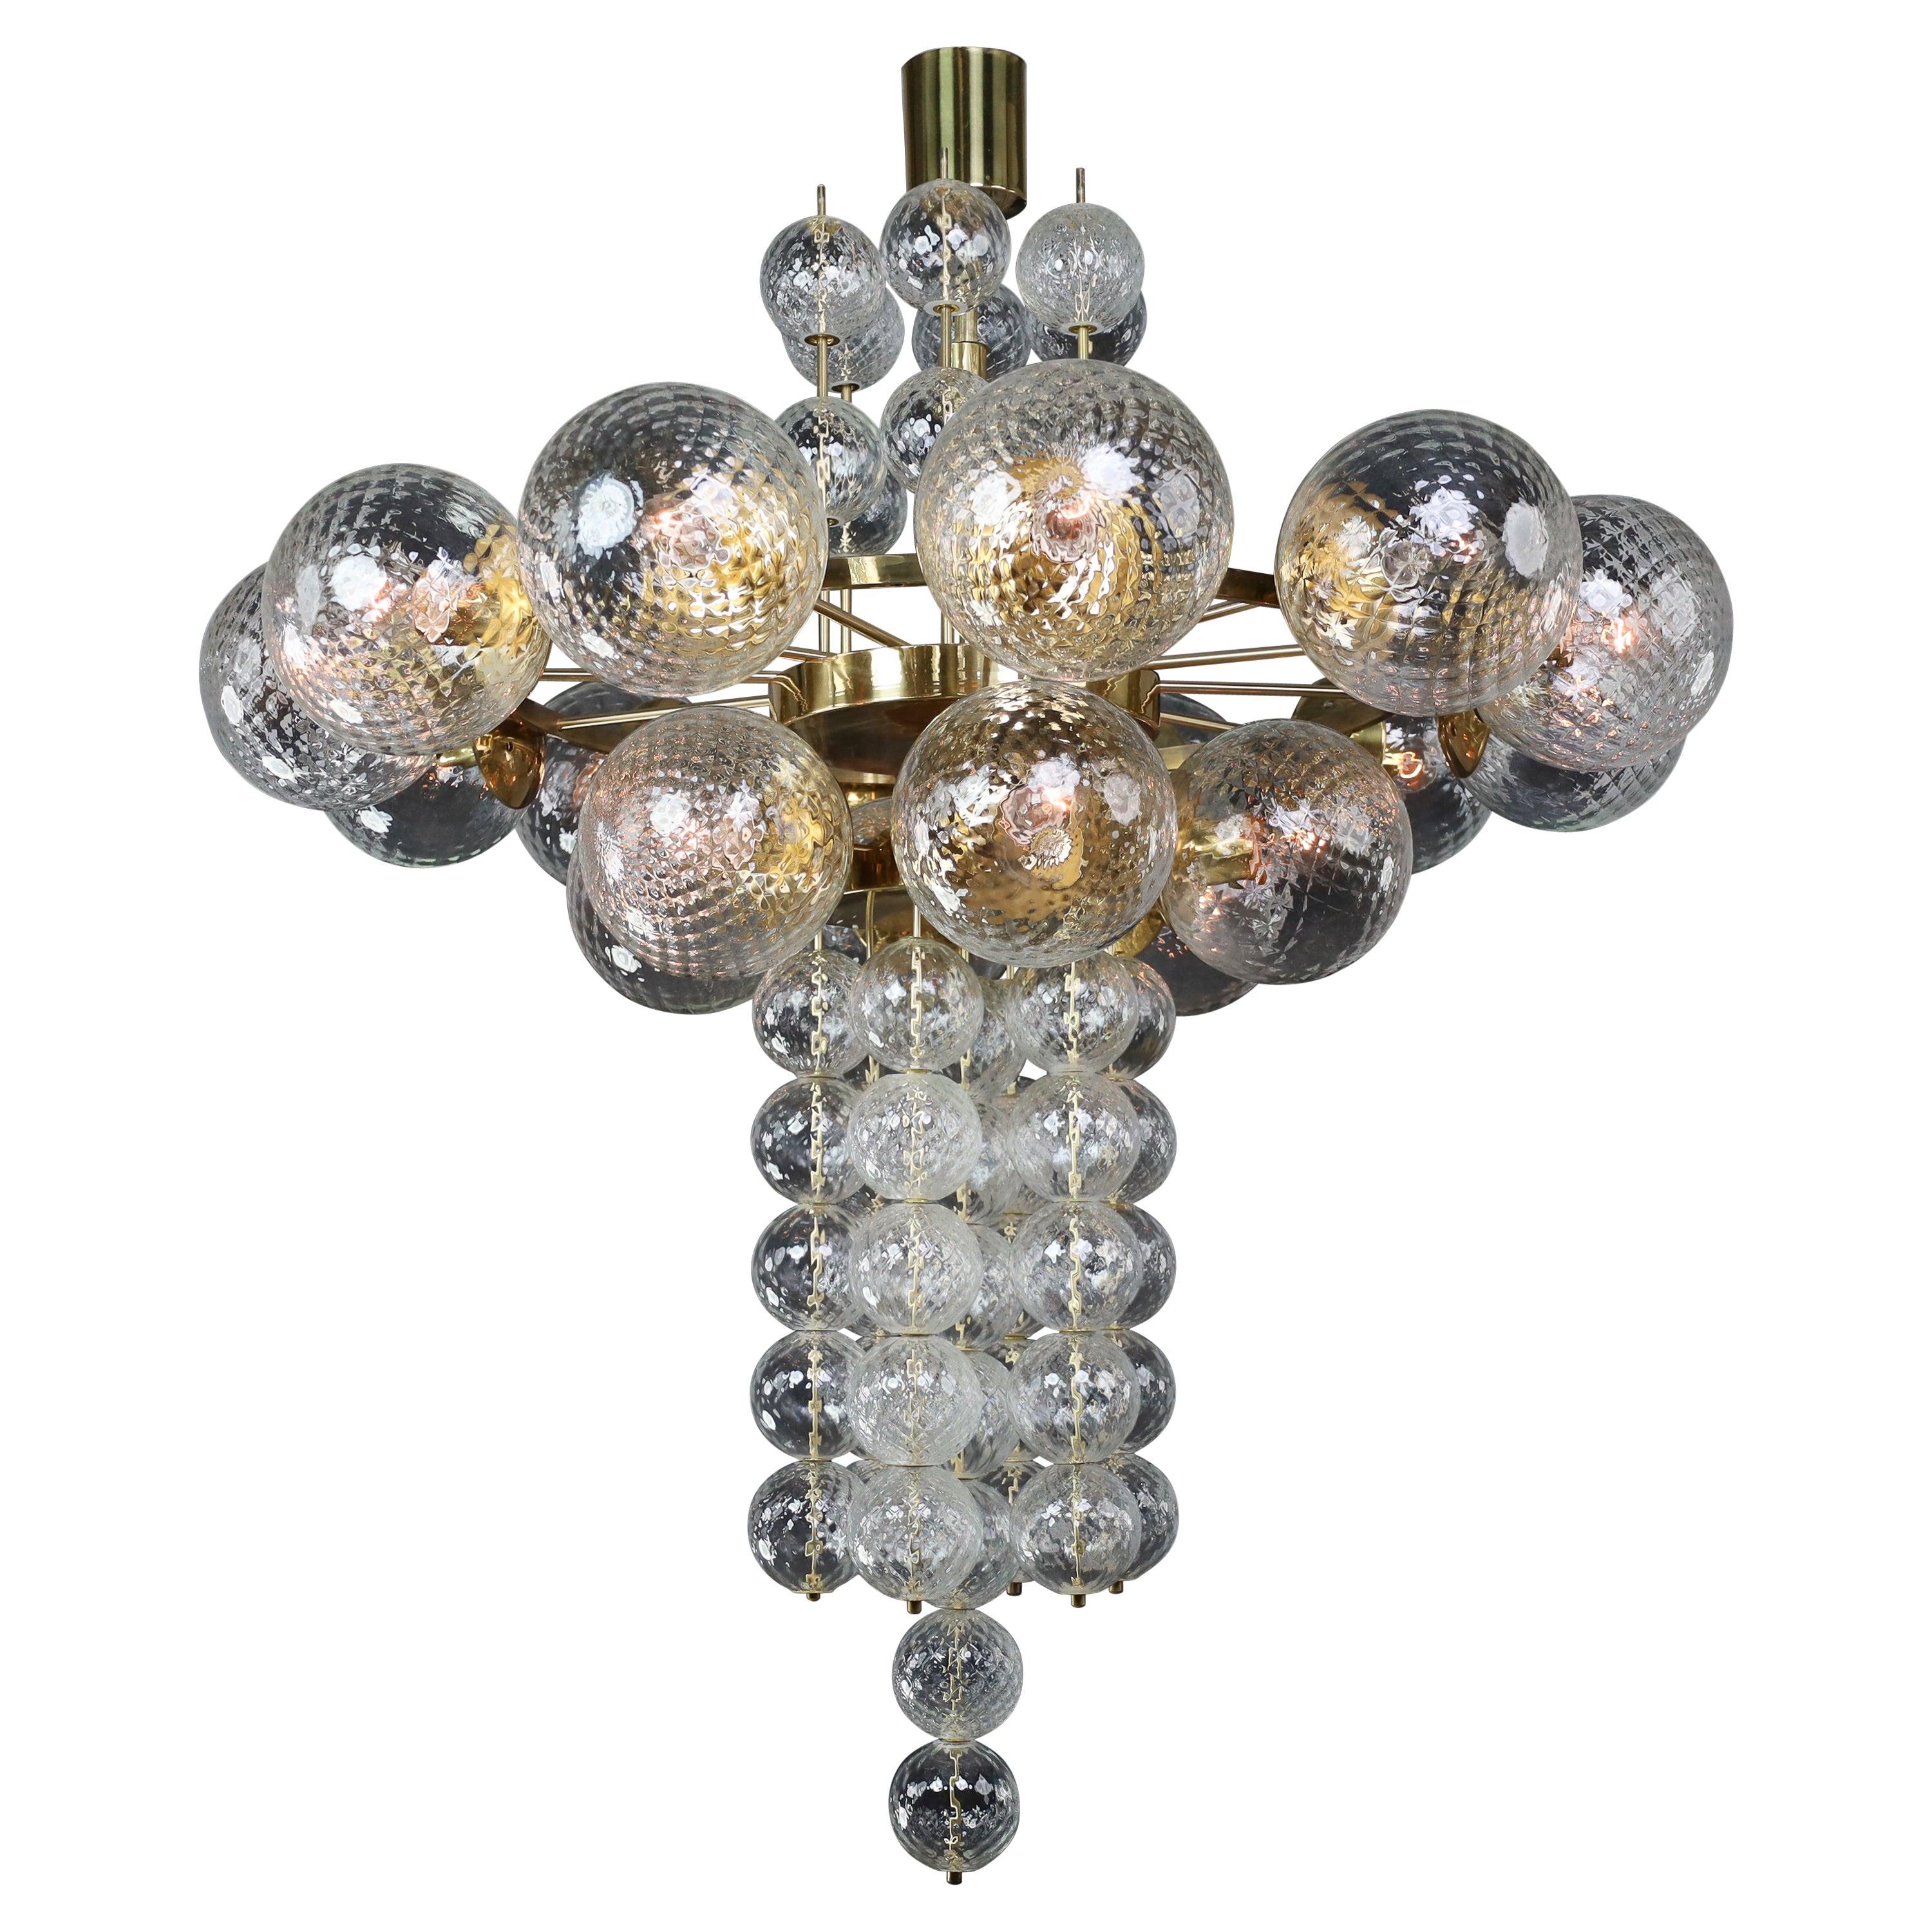 Large Chandelier with brass fixture and hand-blowed glass globes by Preciosa Cz.